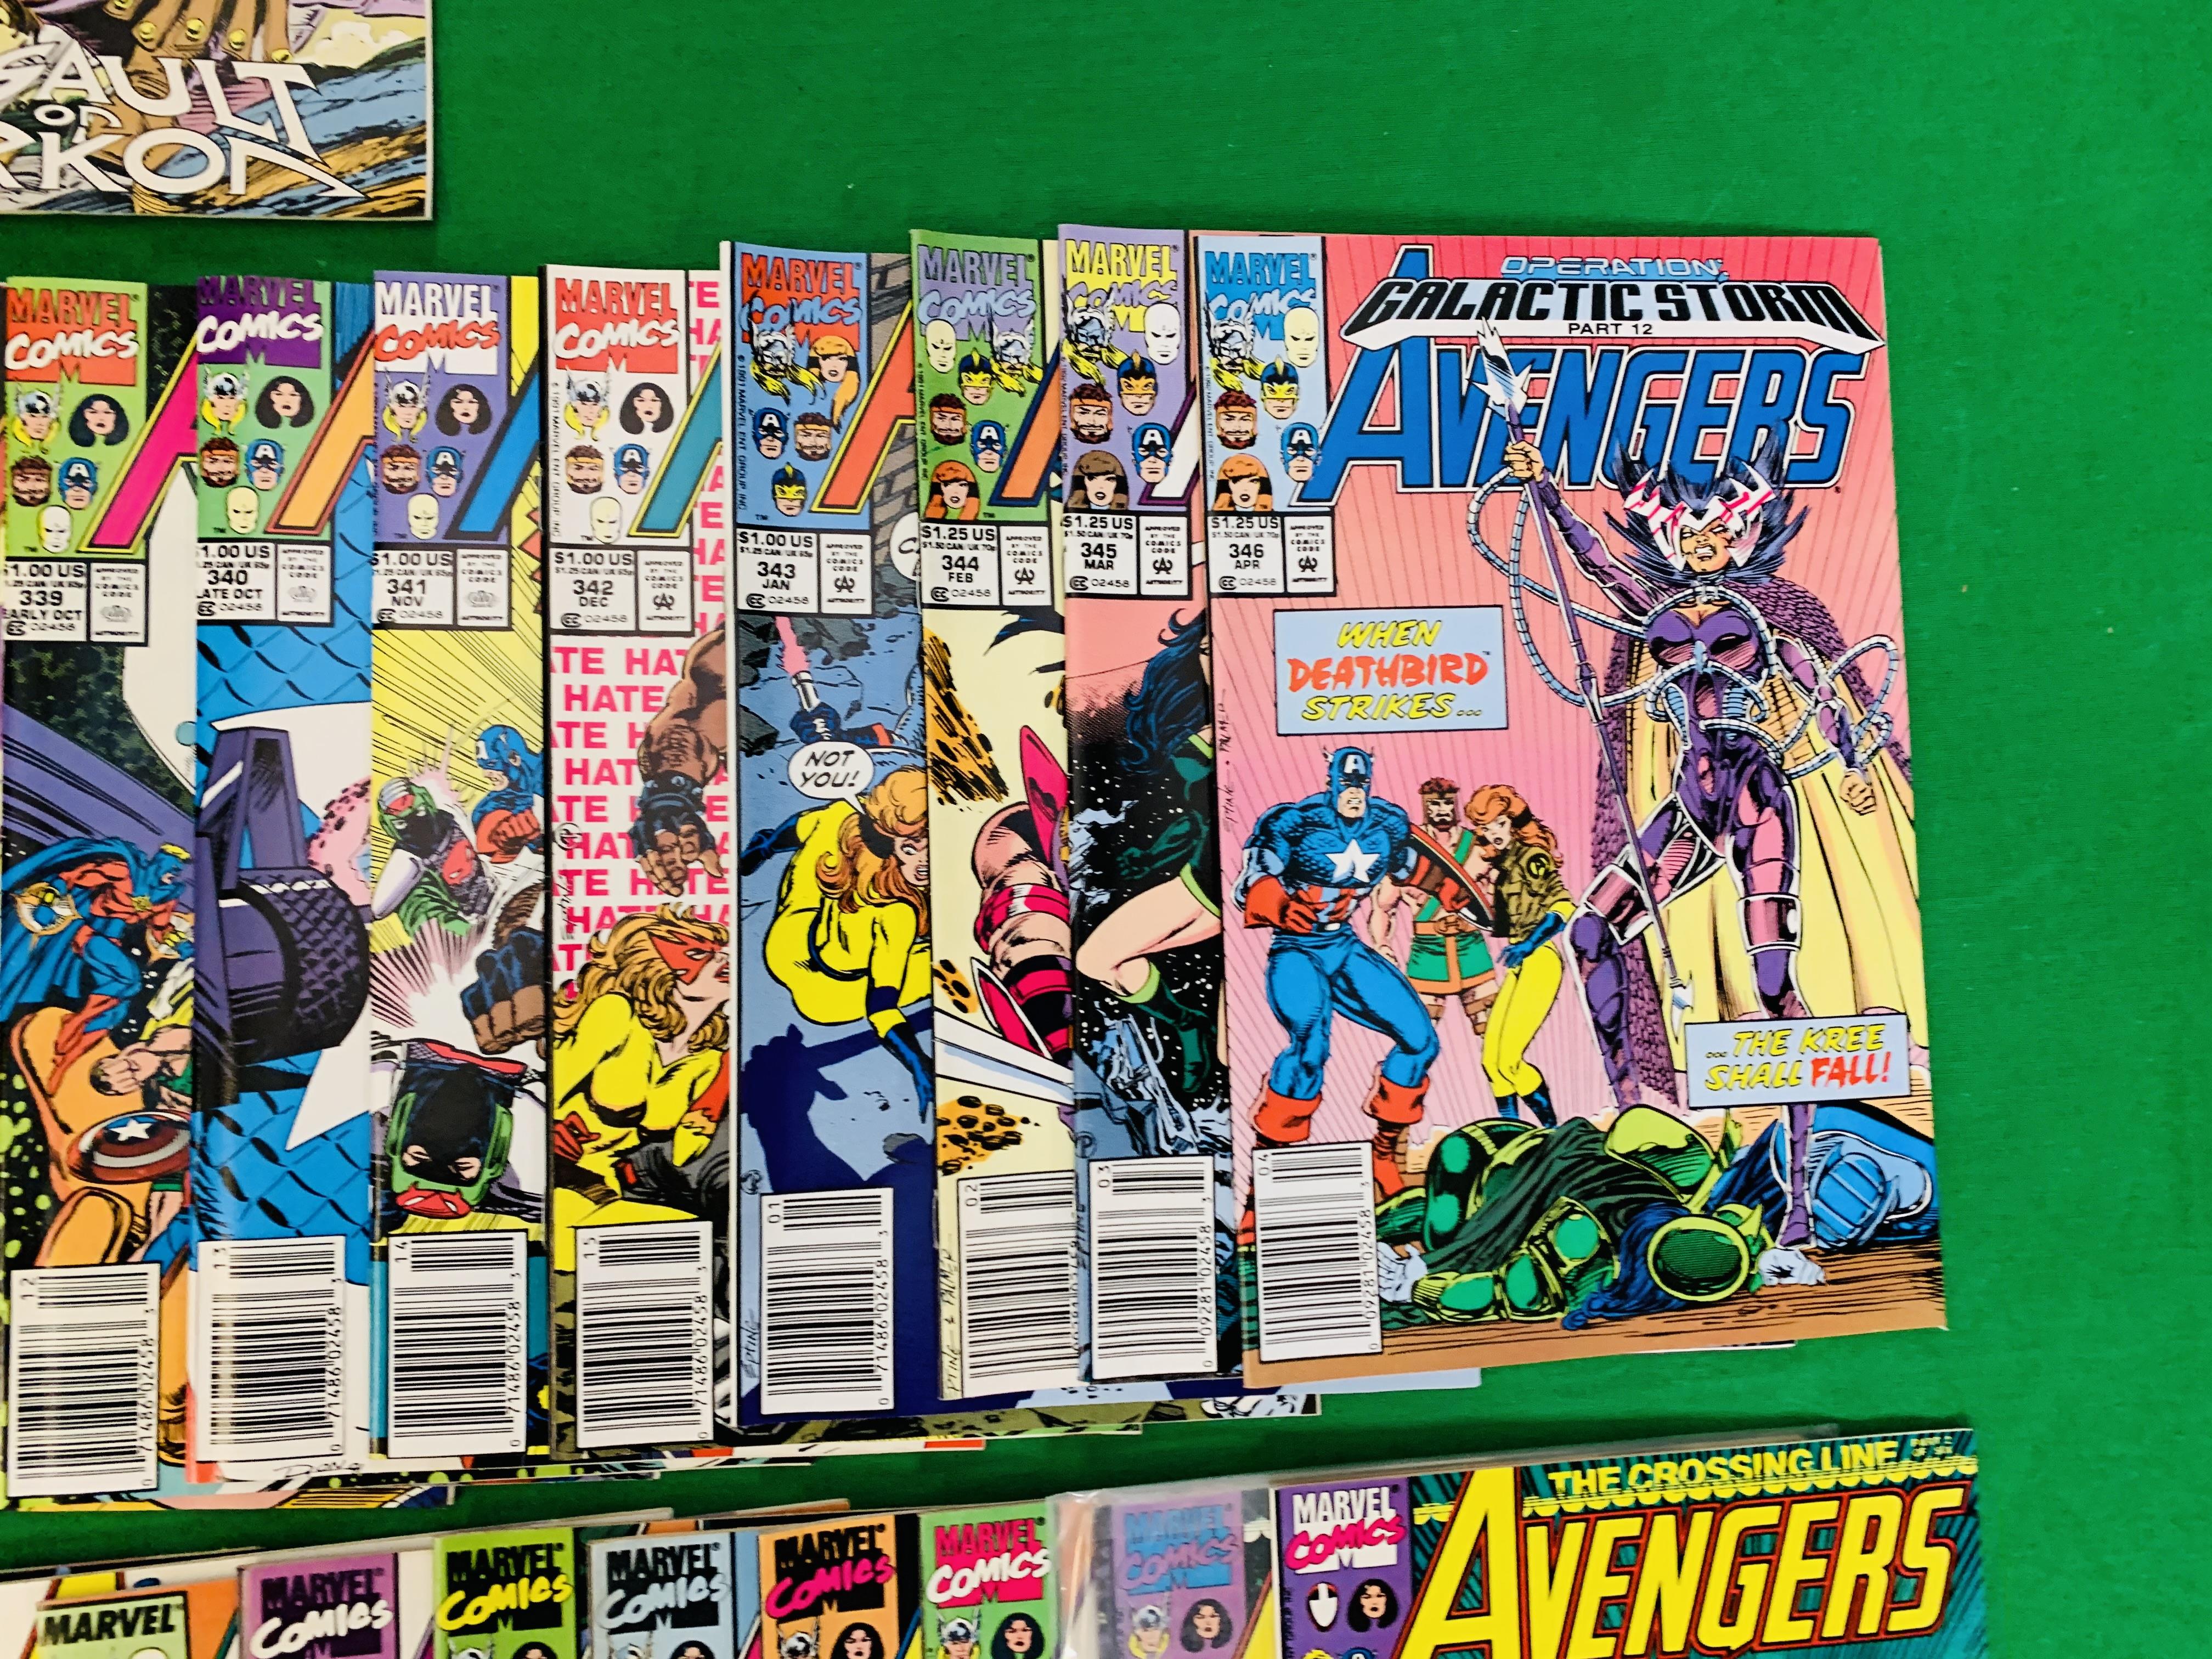 MARVEL COMICS THE AVENGERS NO. 300 - 402, MISSING ISSUES 325, 329 AND 334. - Image 7 of 16